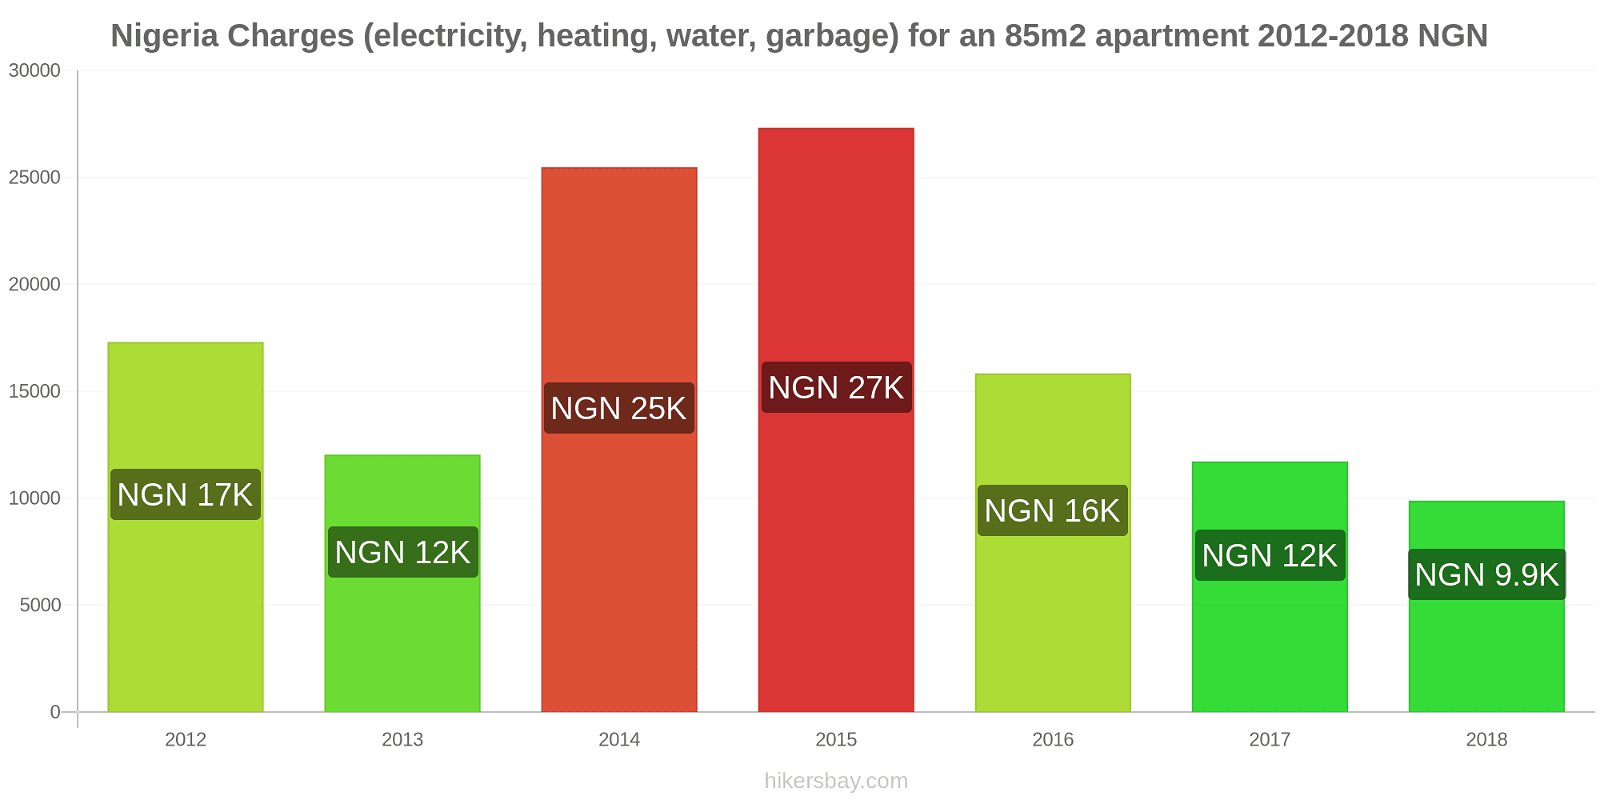 Nigeria price changes Utilities (electricity, heating, water, garbage) for an 85m2 apartment hikersbay.com